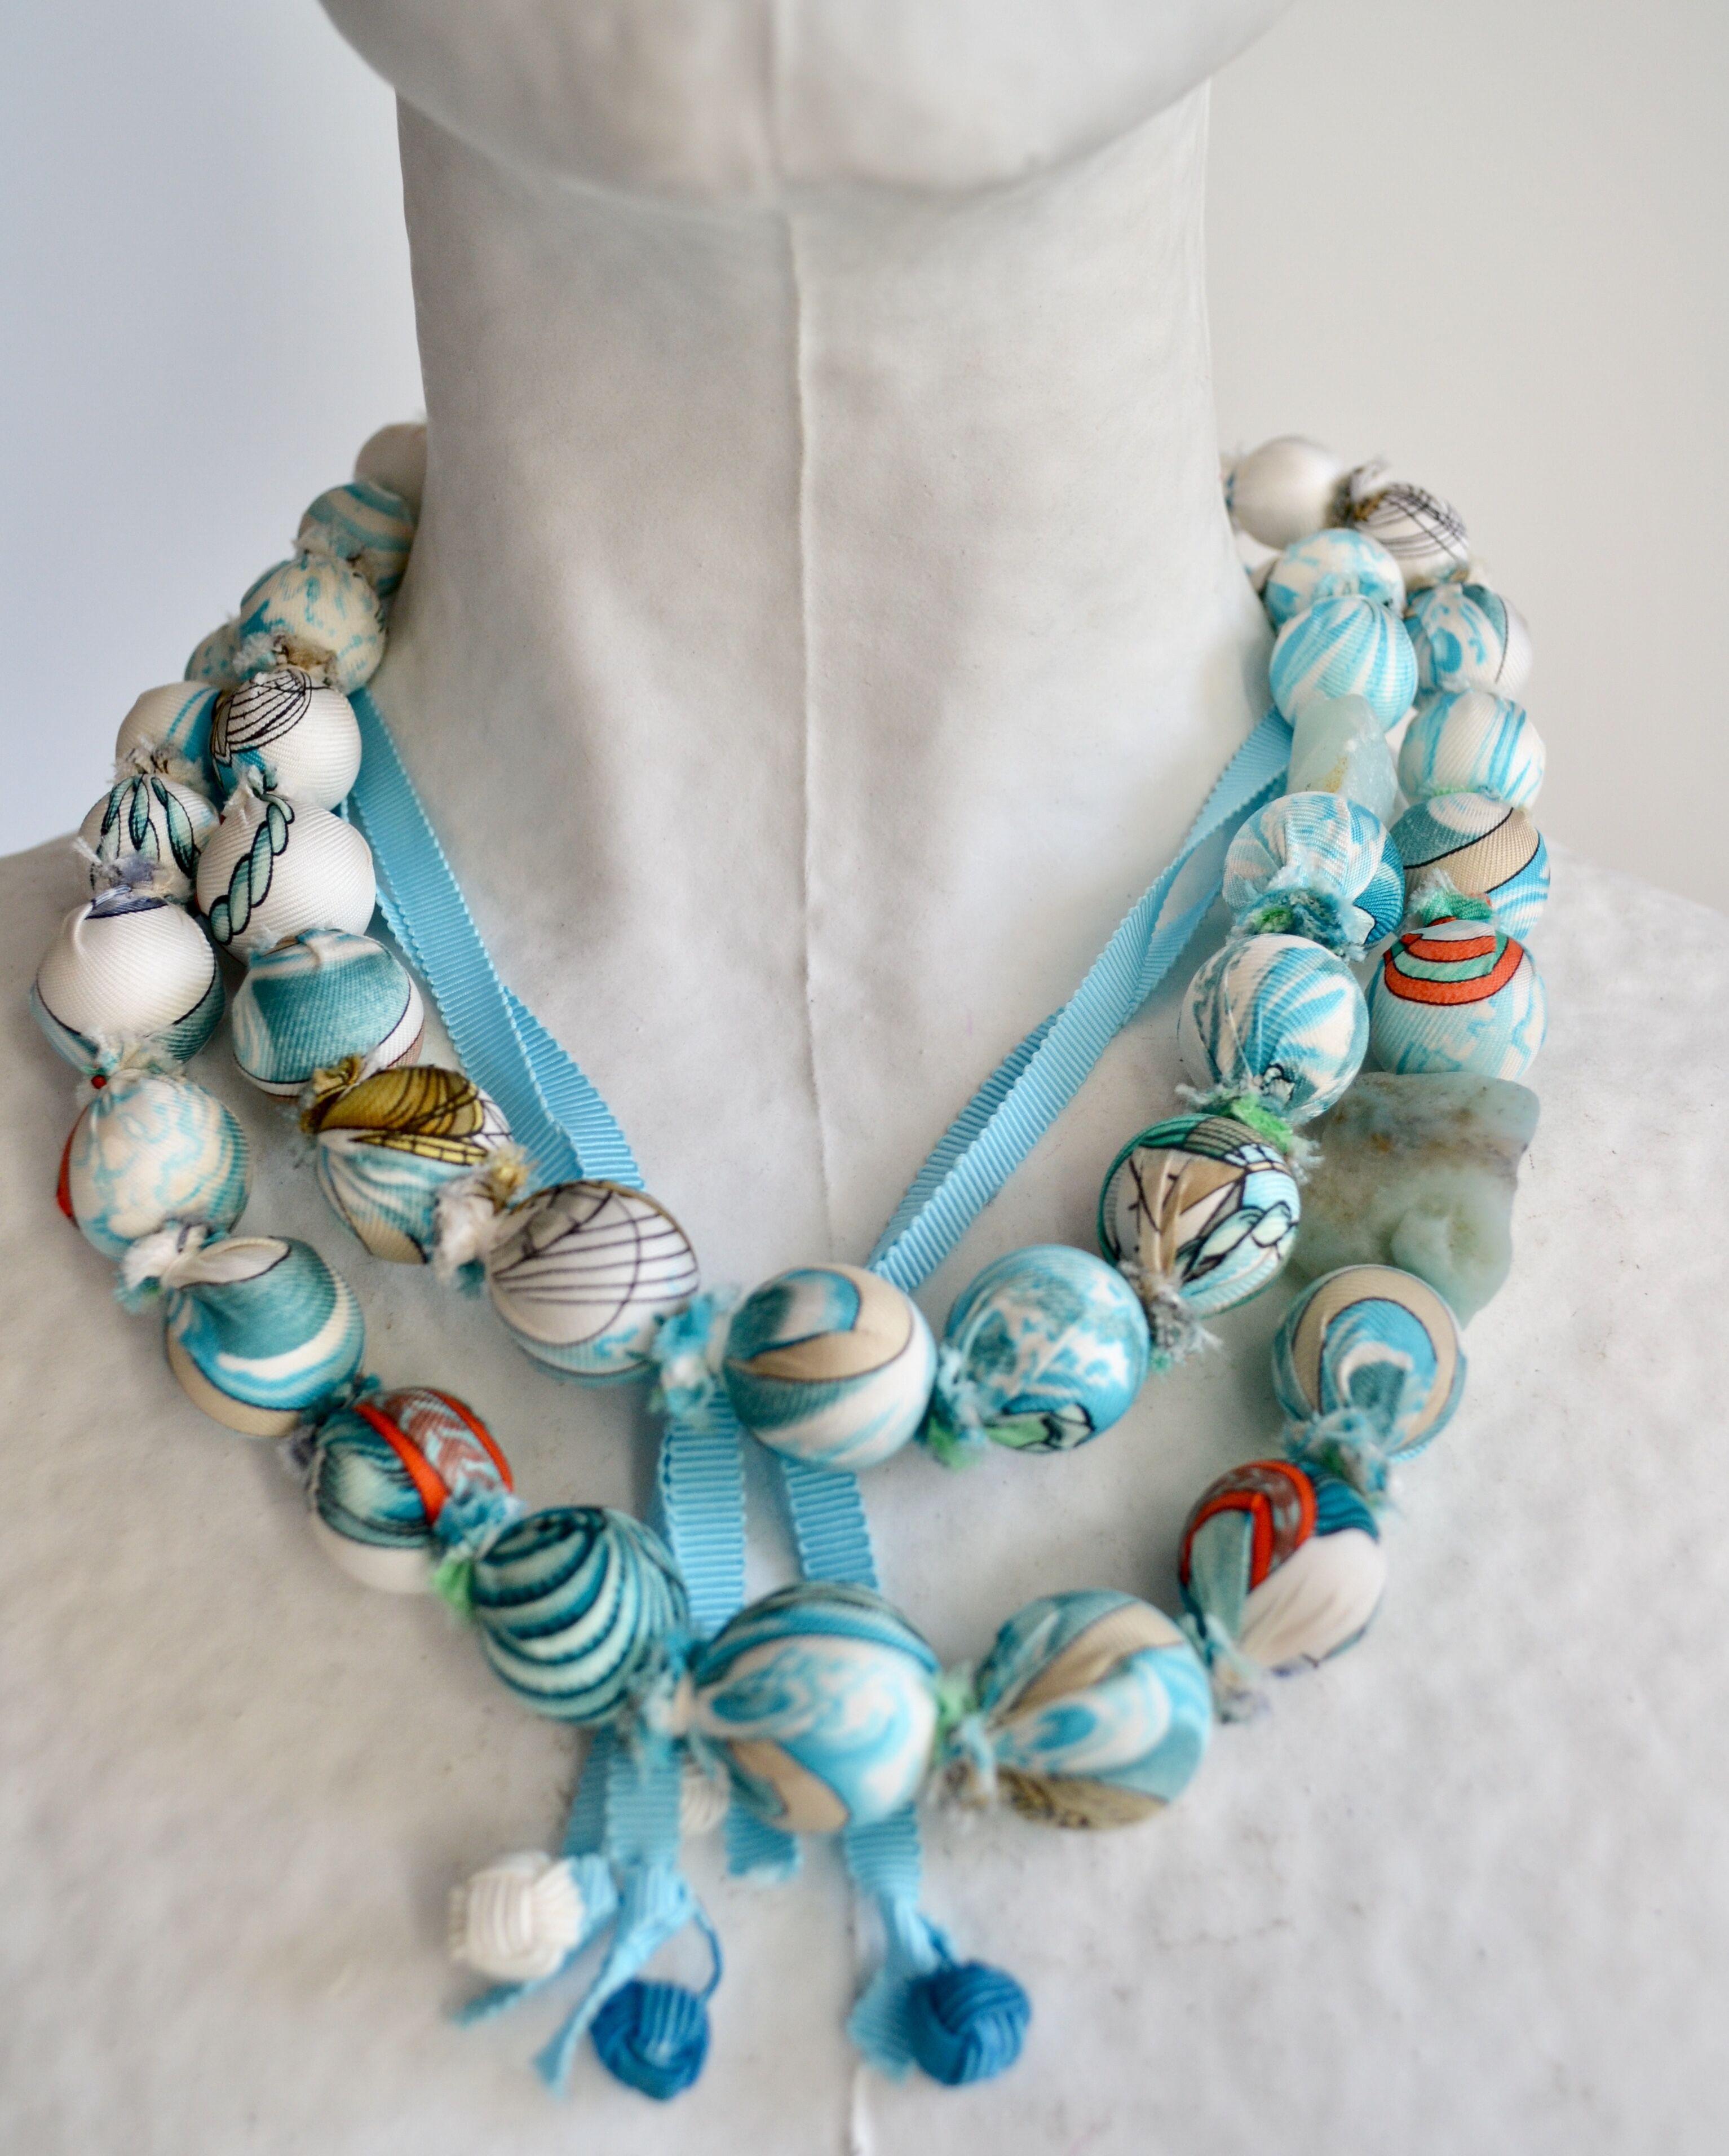 One of a kind double row bead necklace hand wrapped with authentic vintage silk Hermes scarves. Semi precious stones throughout. Made by Gordana Gasparovic. Adjustable length.
